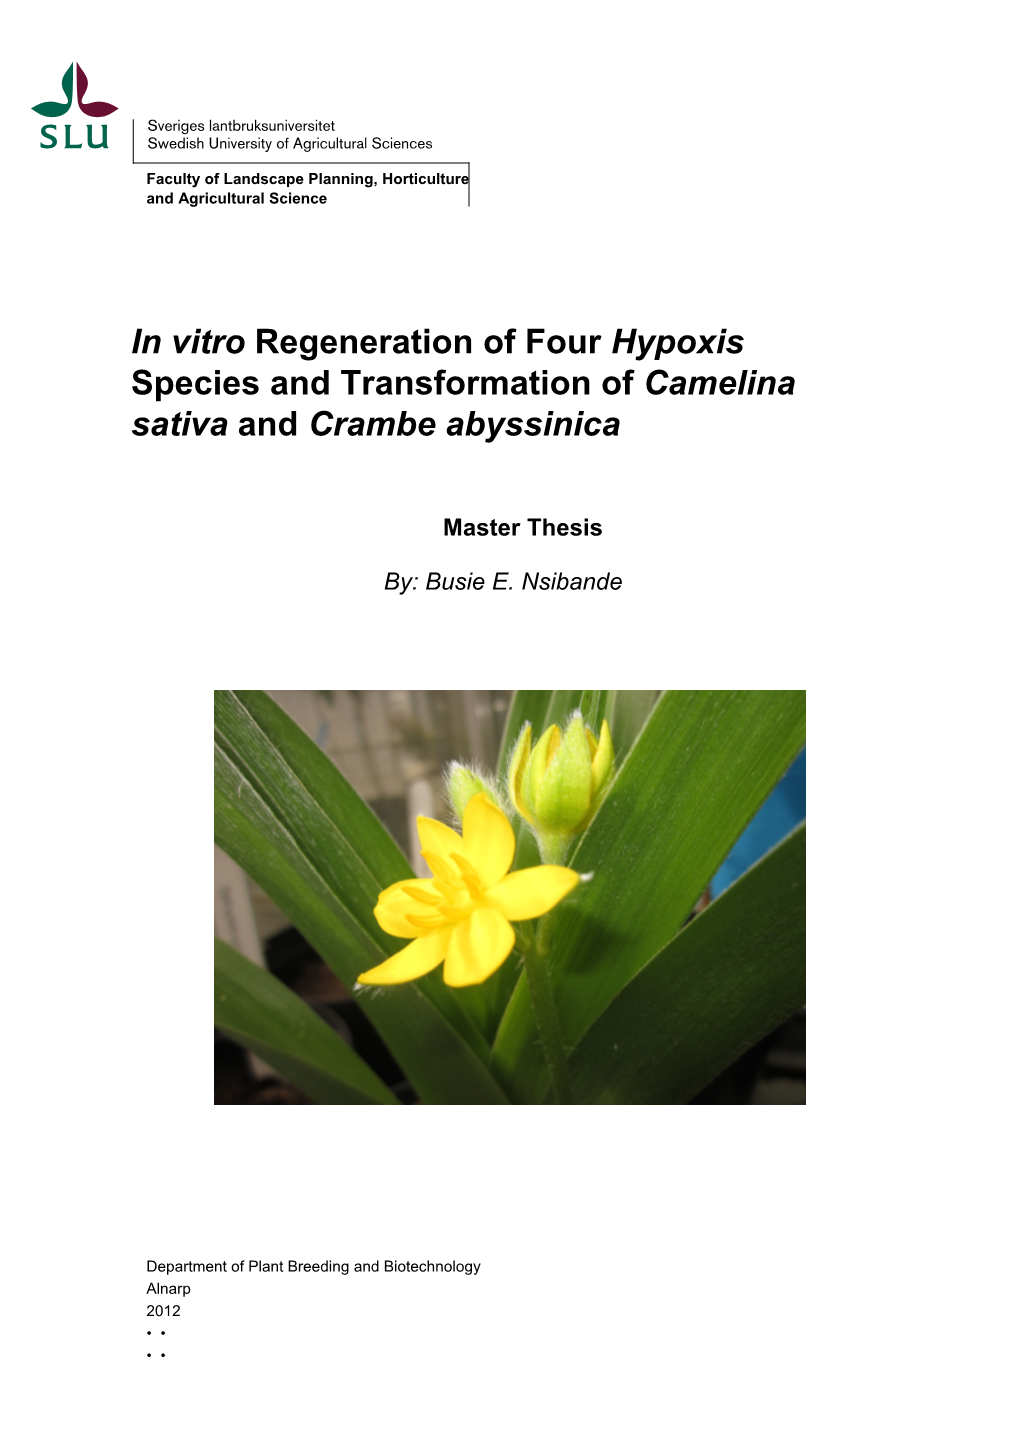 In Vitro Regeneration of Four Hypoxis Species and Transformation of Camelina Sativa and Crambe Abyssinica